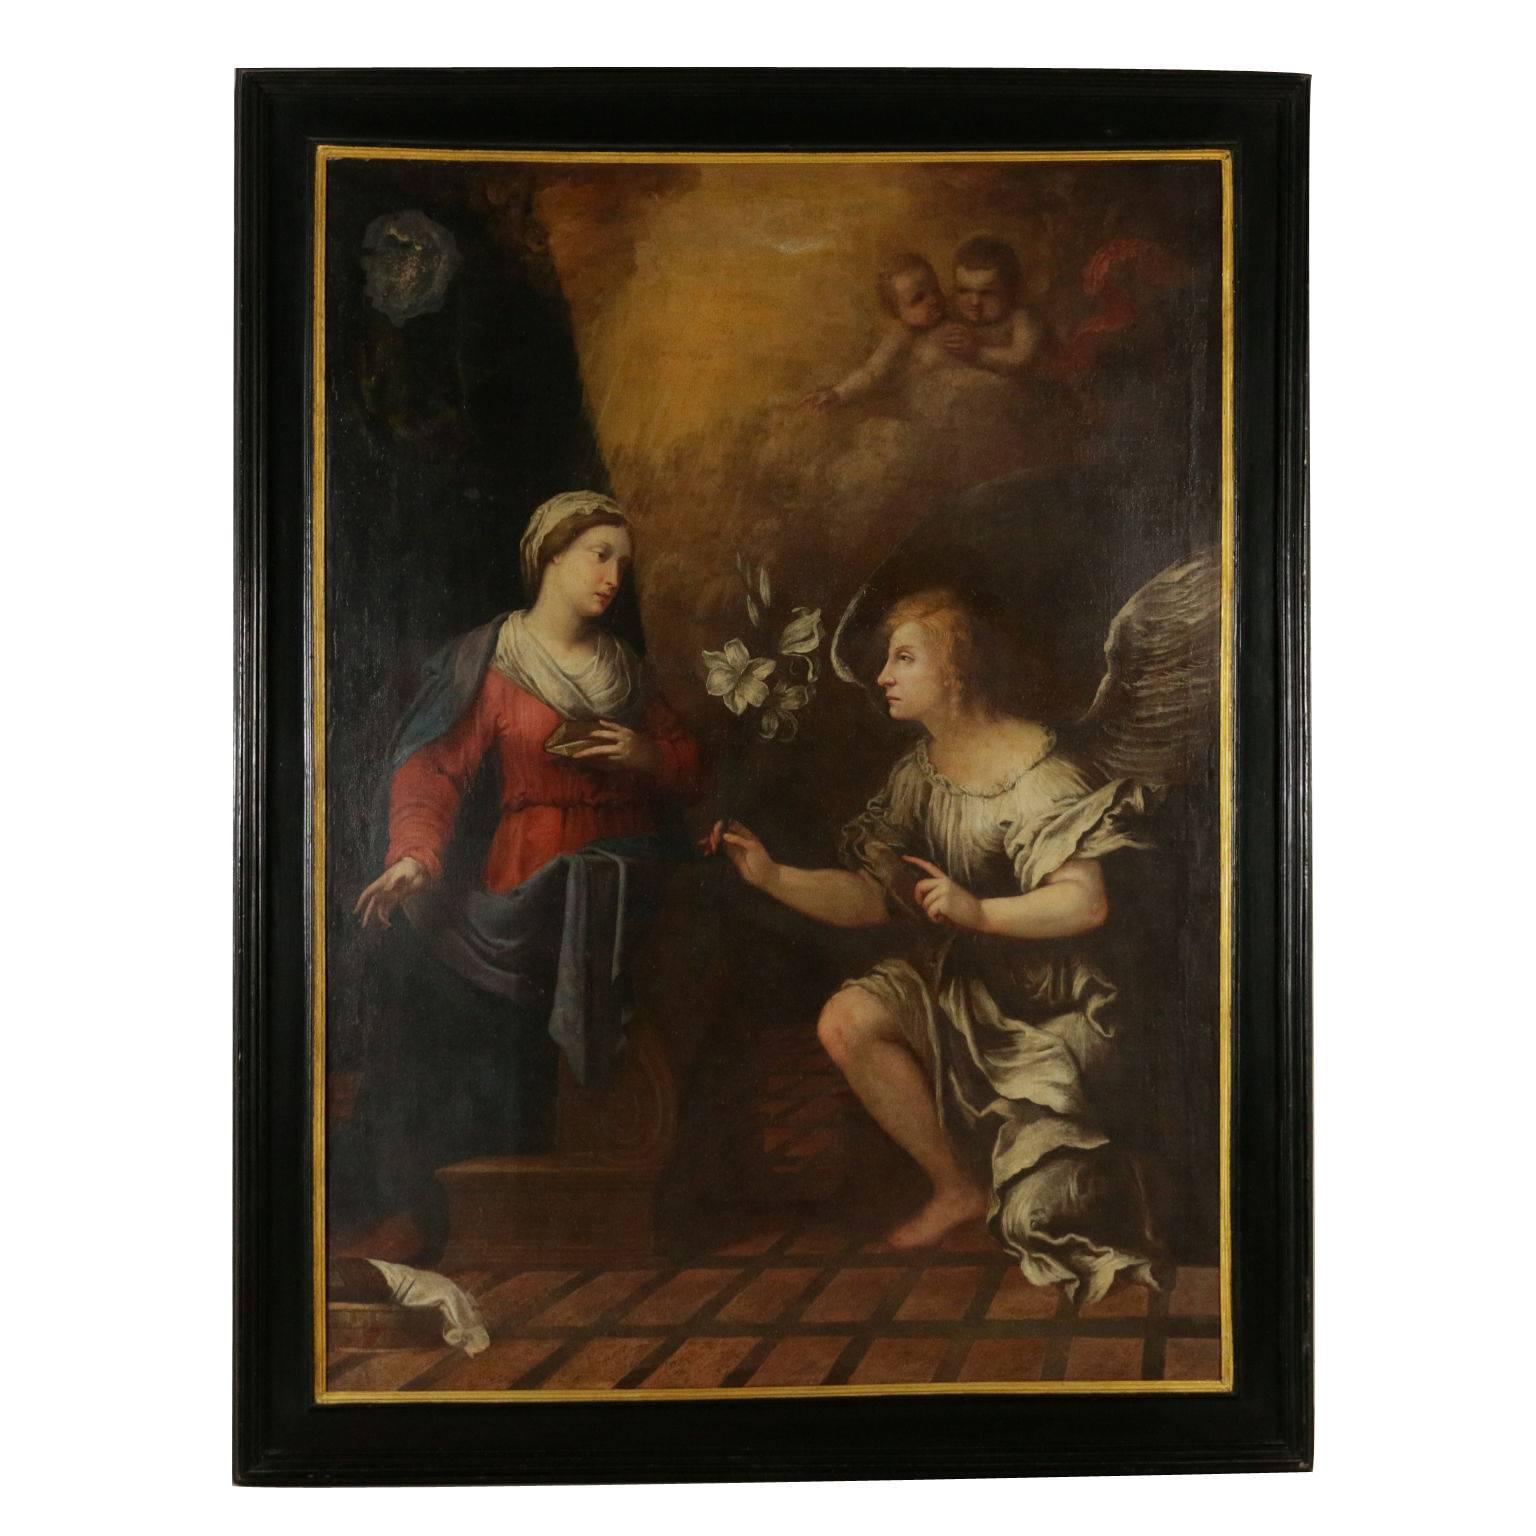 Unknown Interior Painting - Annunciation Oil on Canvas Antique Painting 17th Century